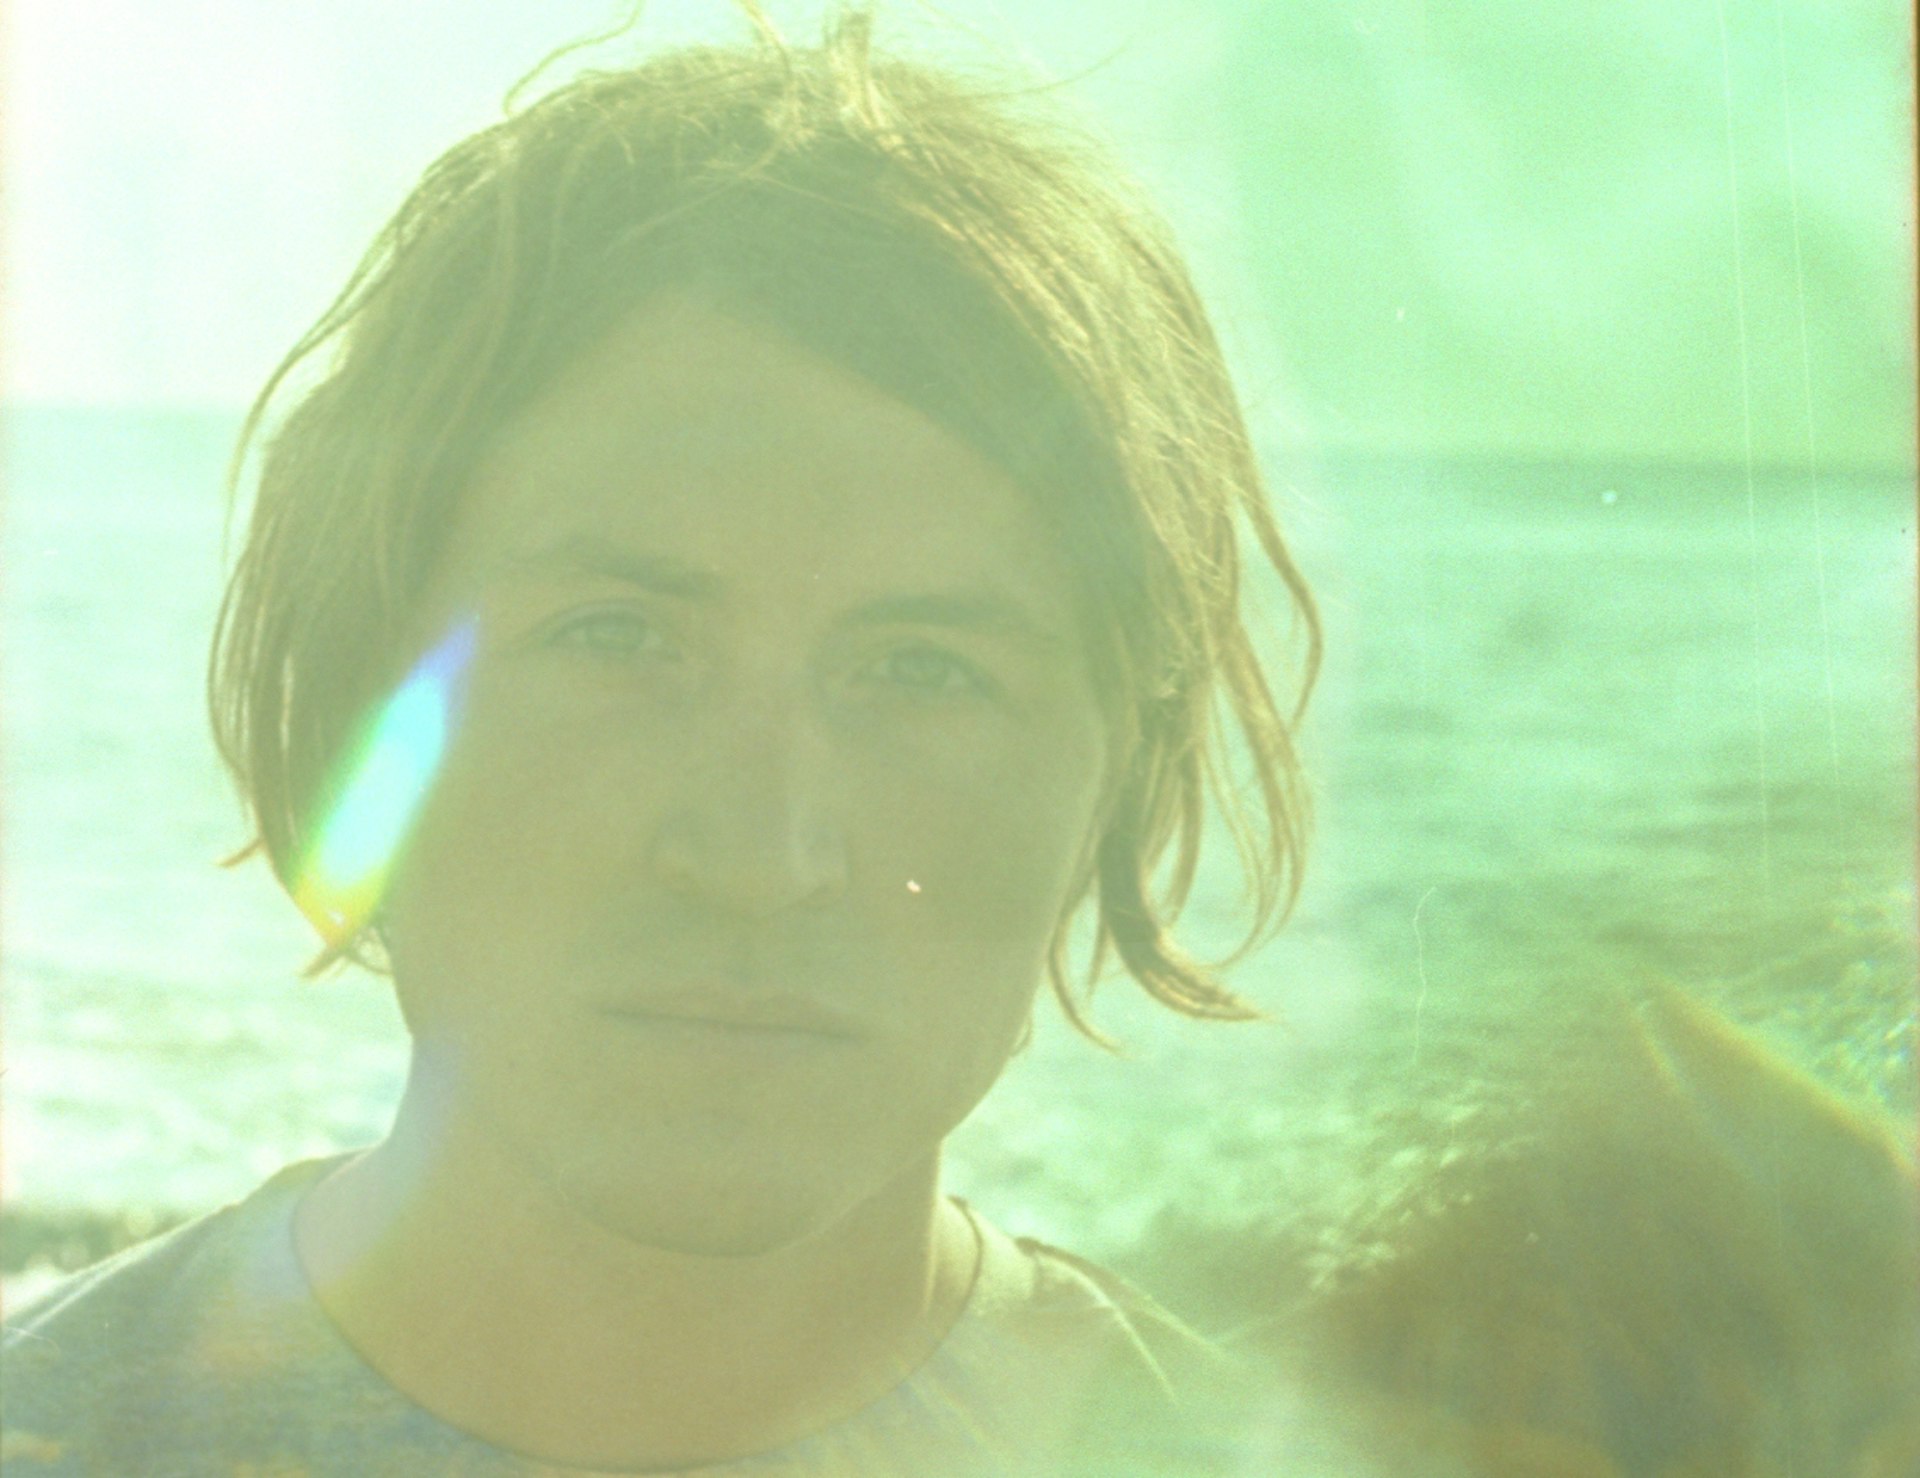 Surf scores: Soundtracking the waves with CJ Mirra